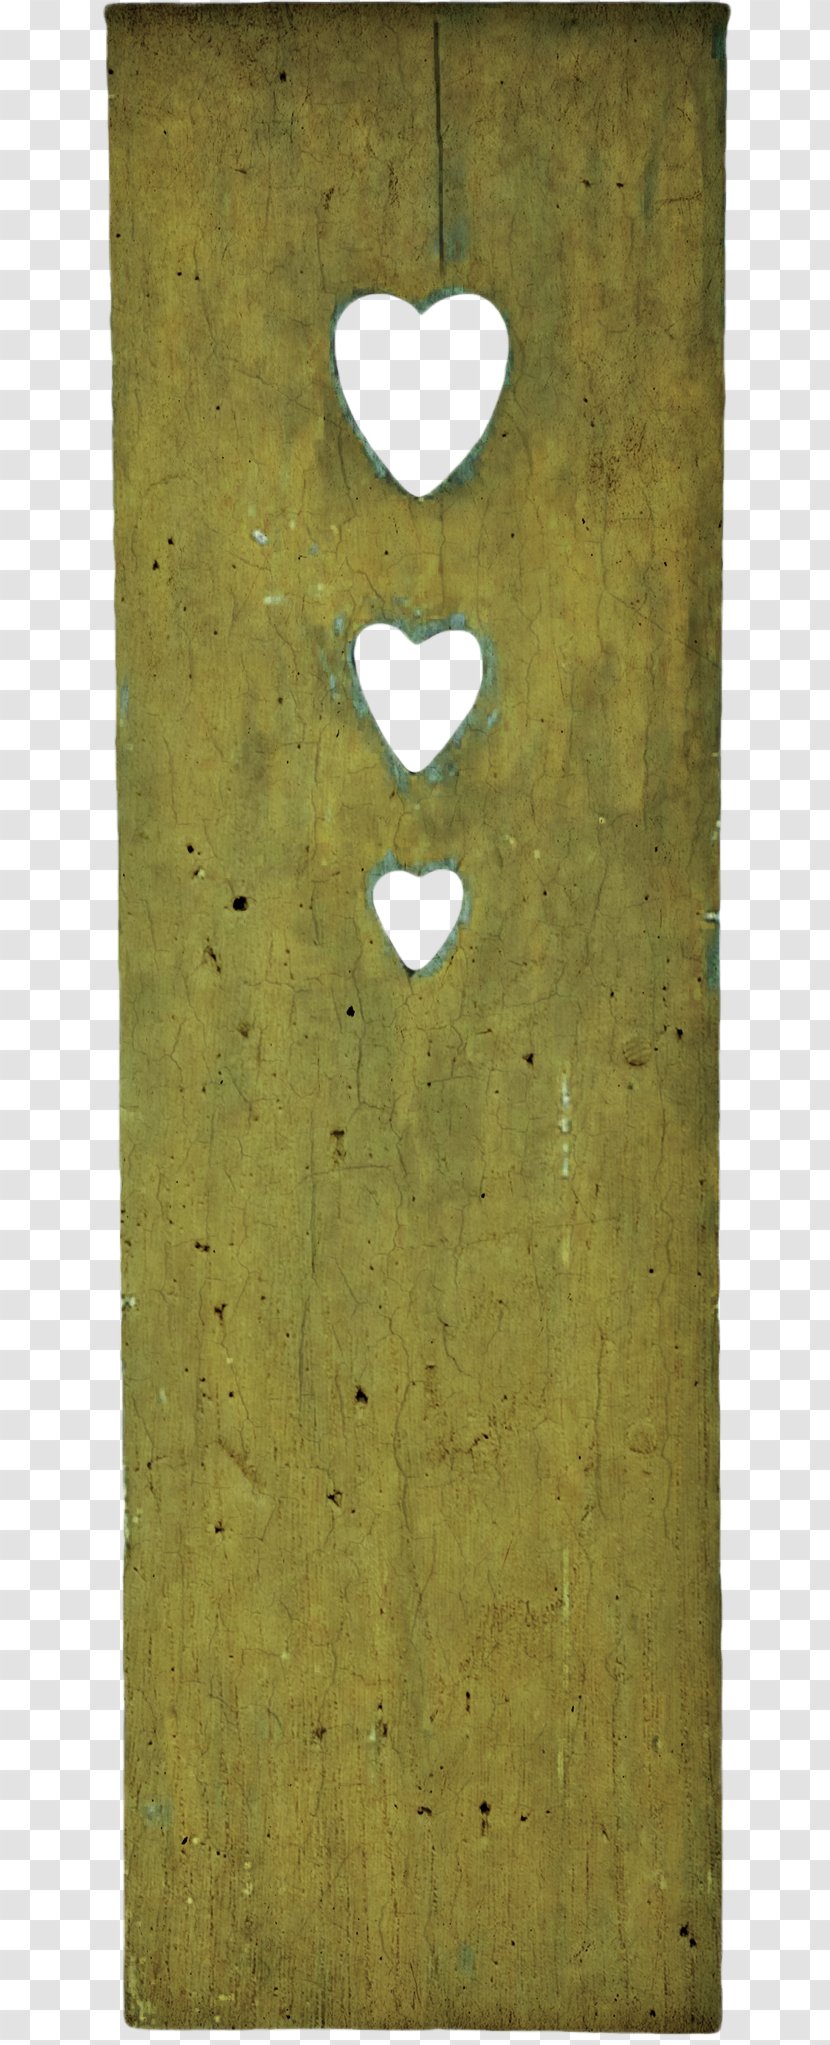 Download - Green - Wood Hollow Heart Transparent PNG